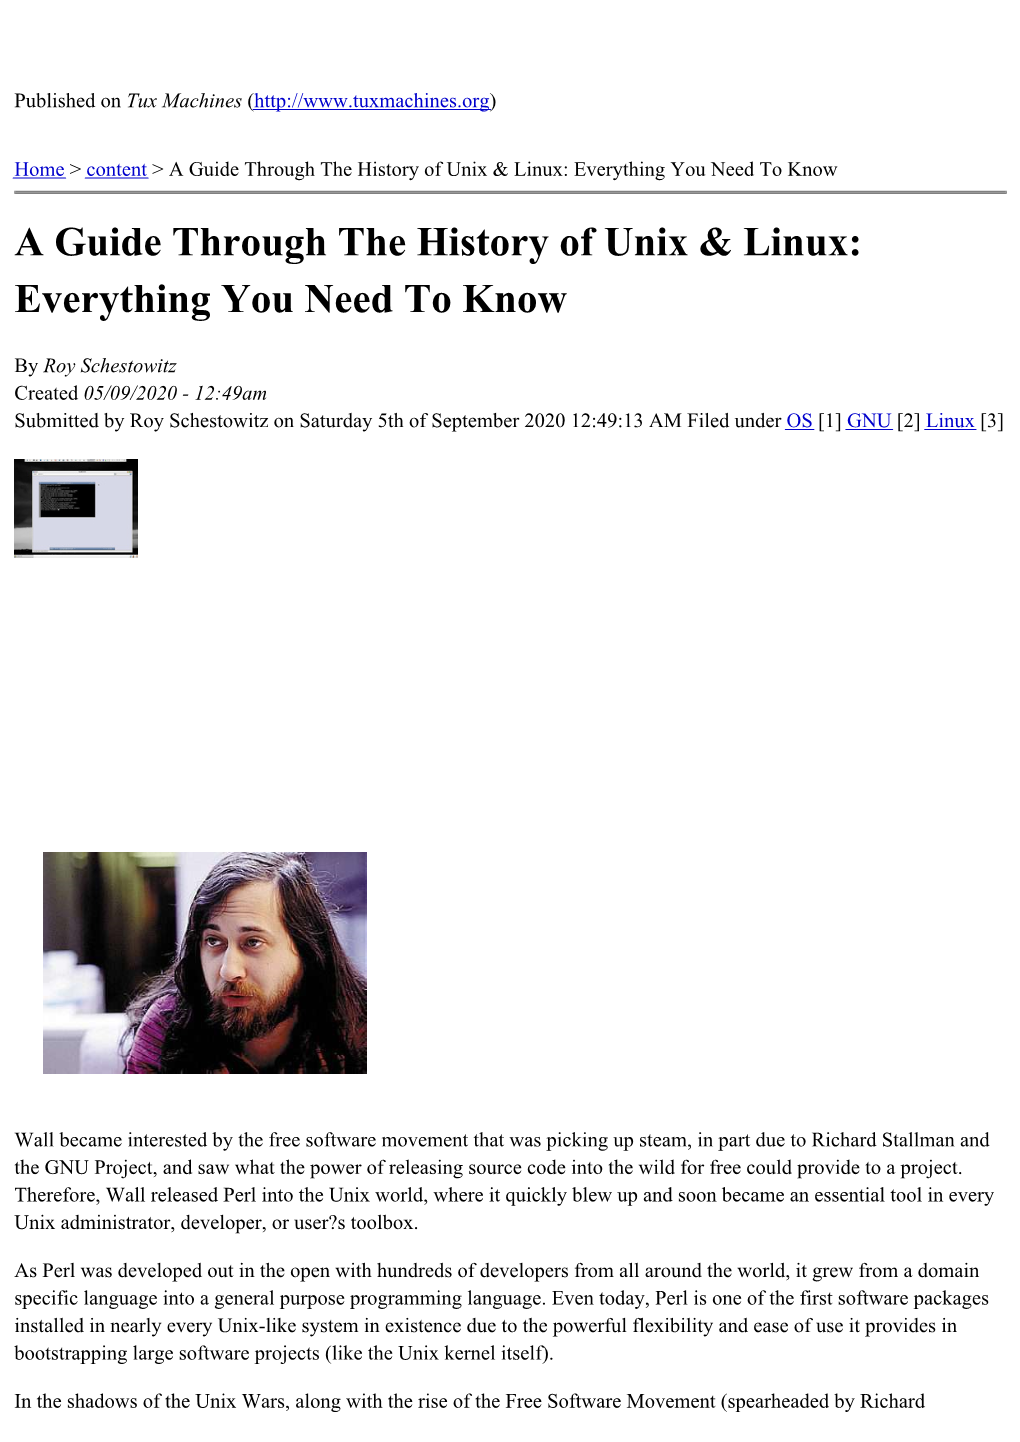 A Guide Through the History of Unix & Linux